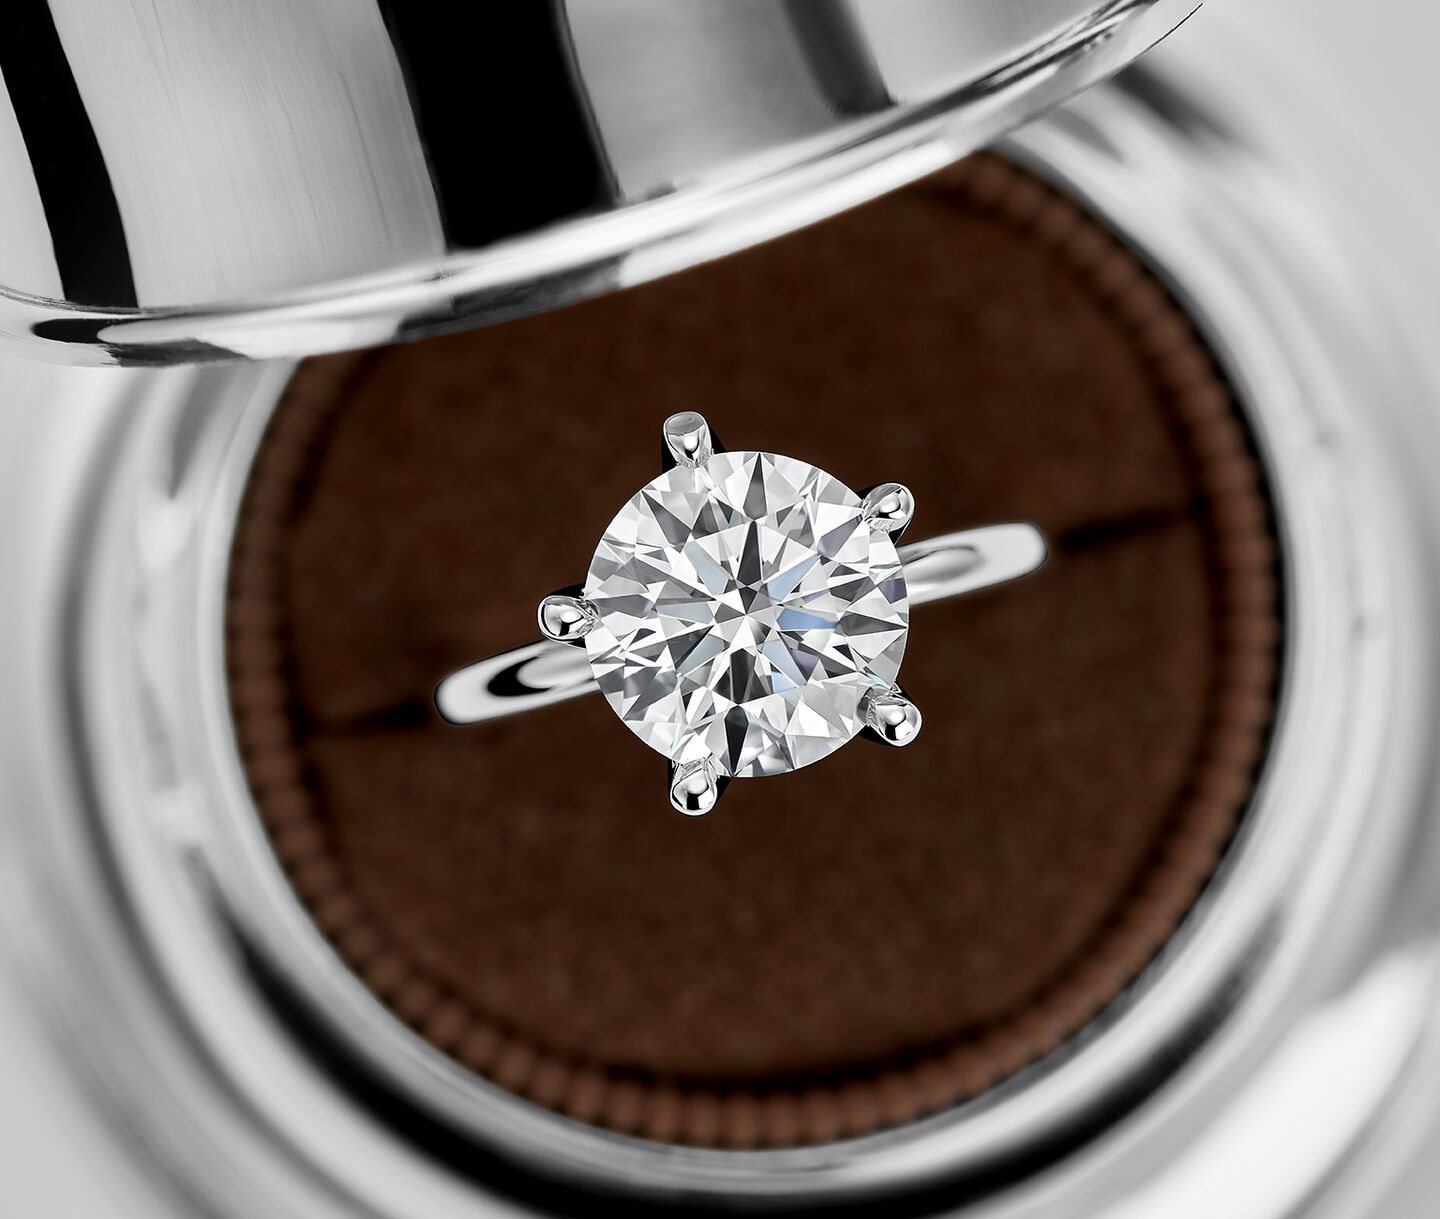 A Birks North Star Round Solitaire Diamond Engagement Ring in a Birks Bell Box.